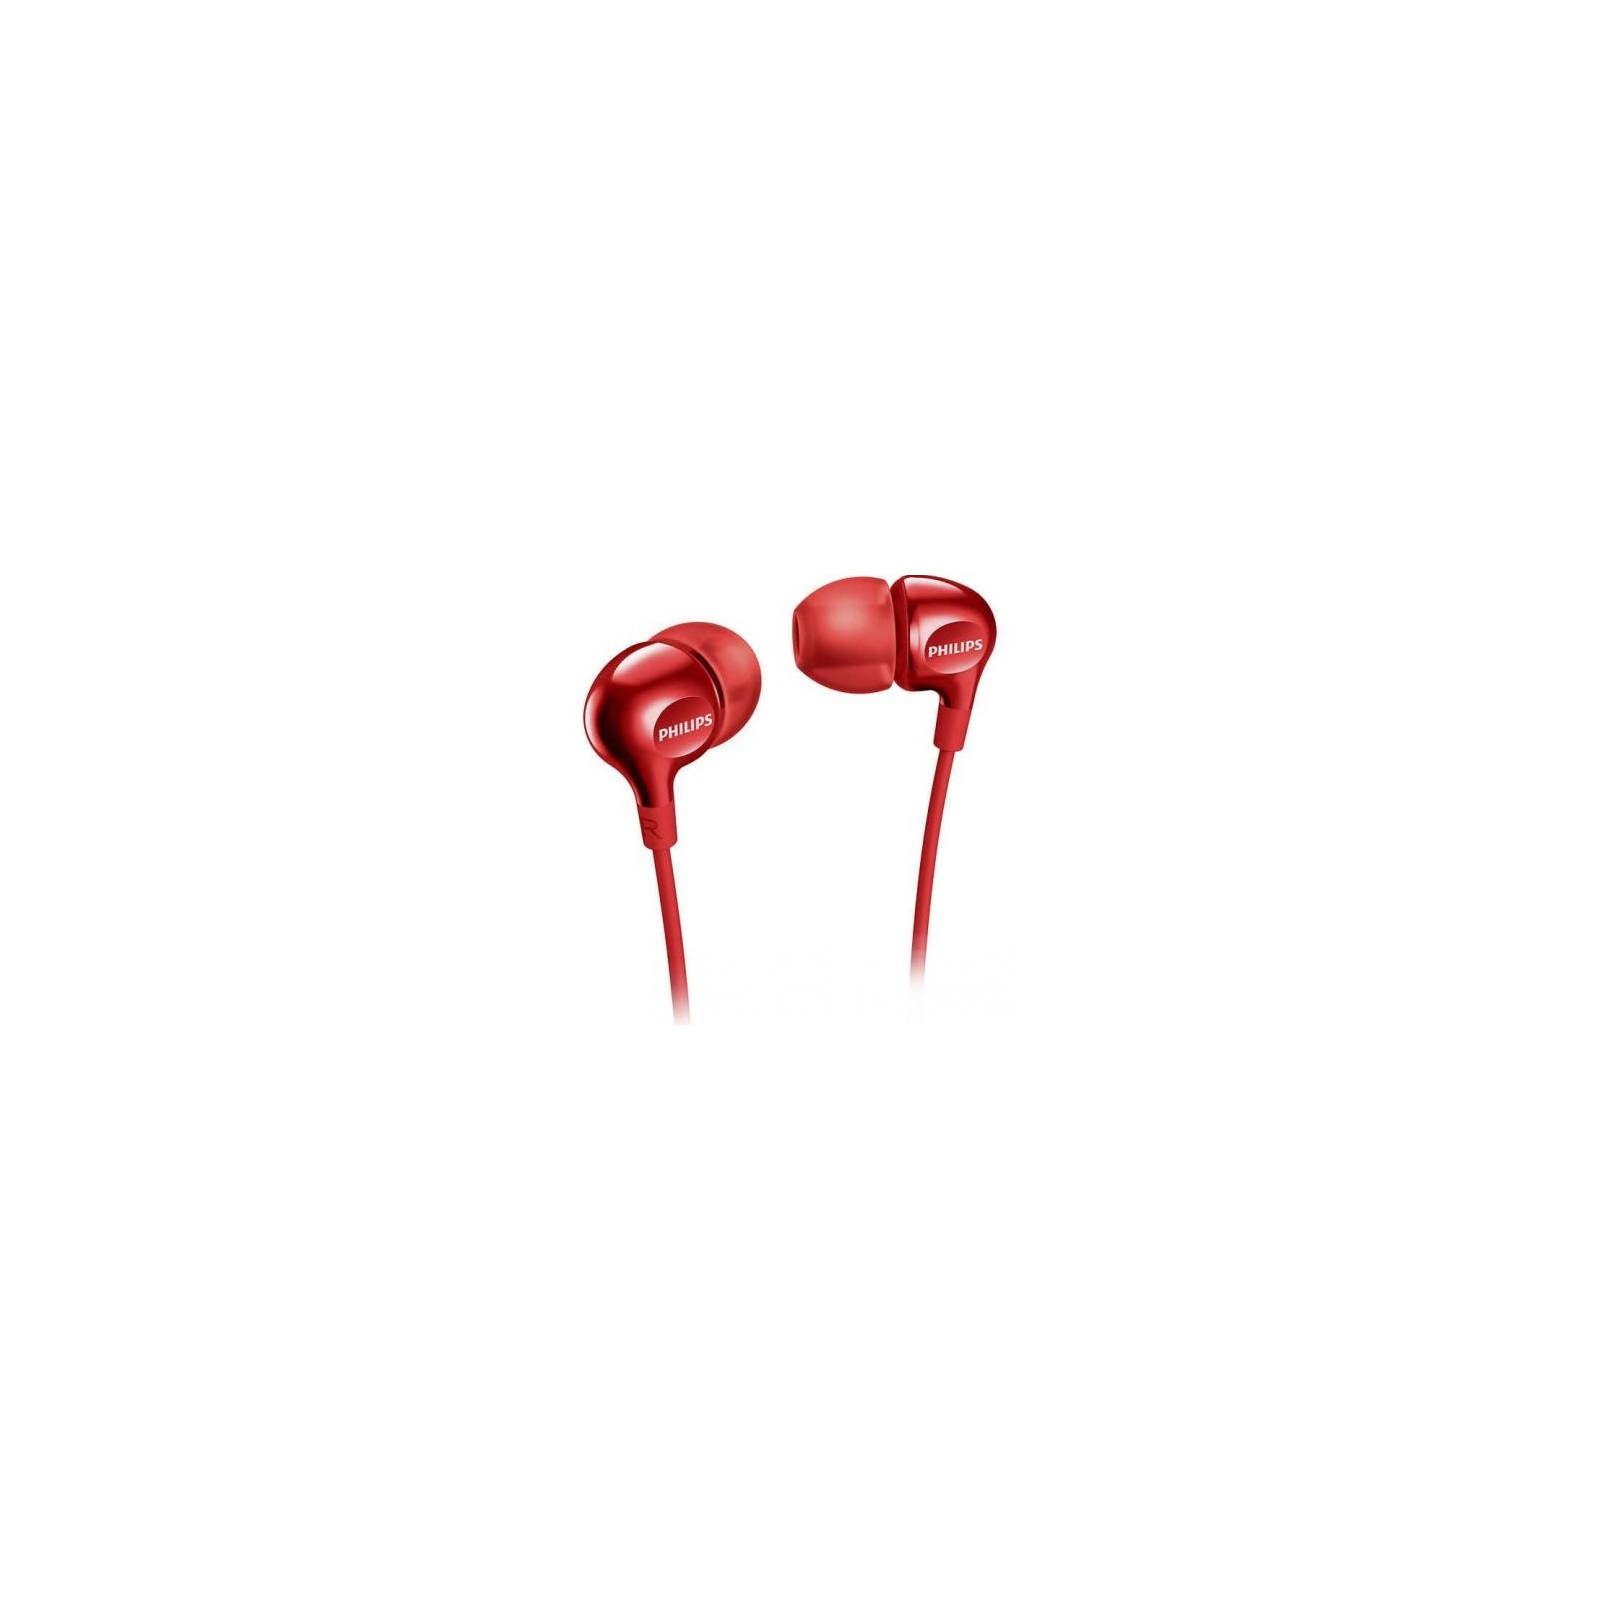 Навушники Philips SHE3555RD Red (SHE3555RD/00)